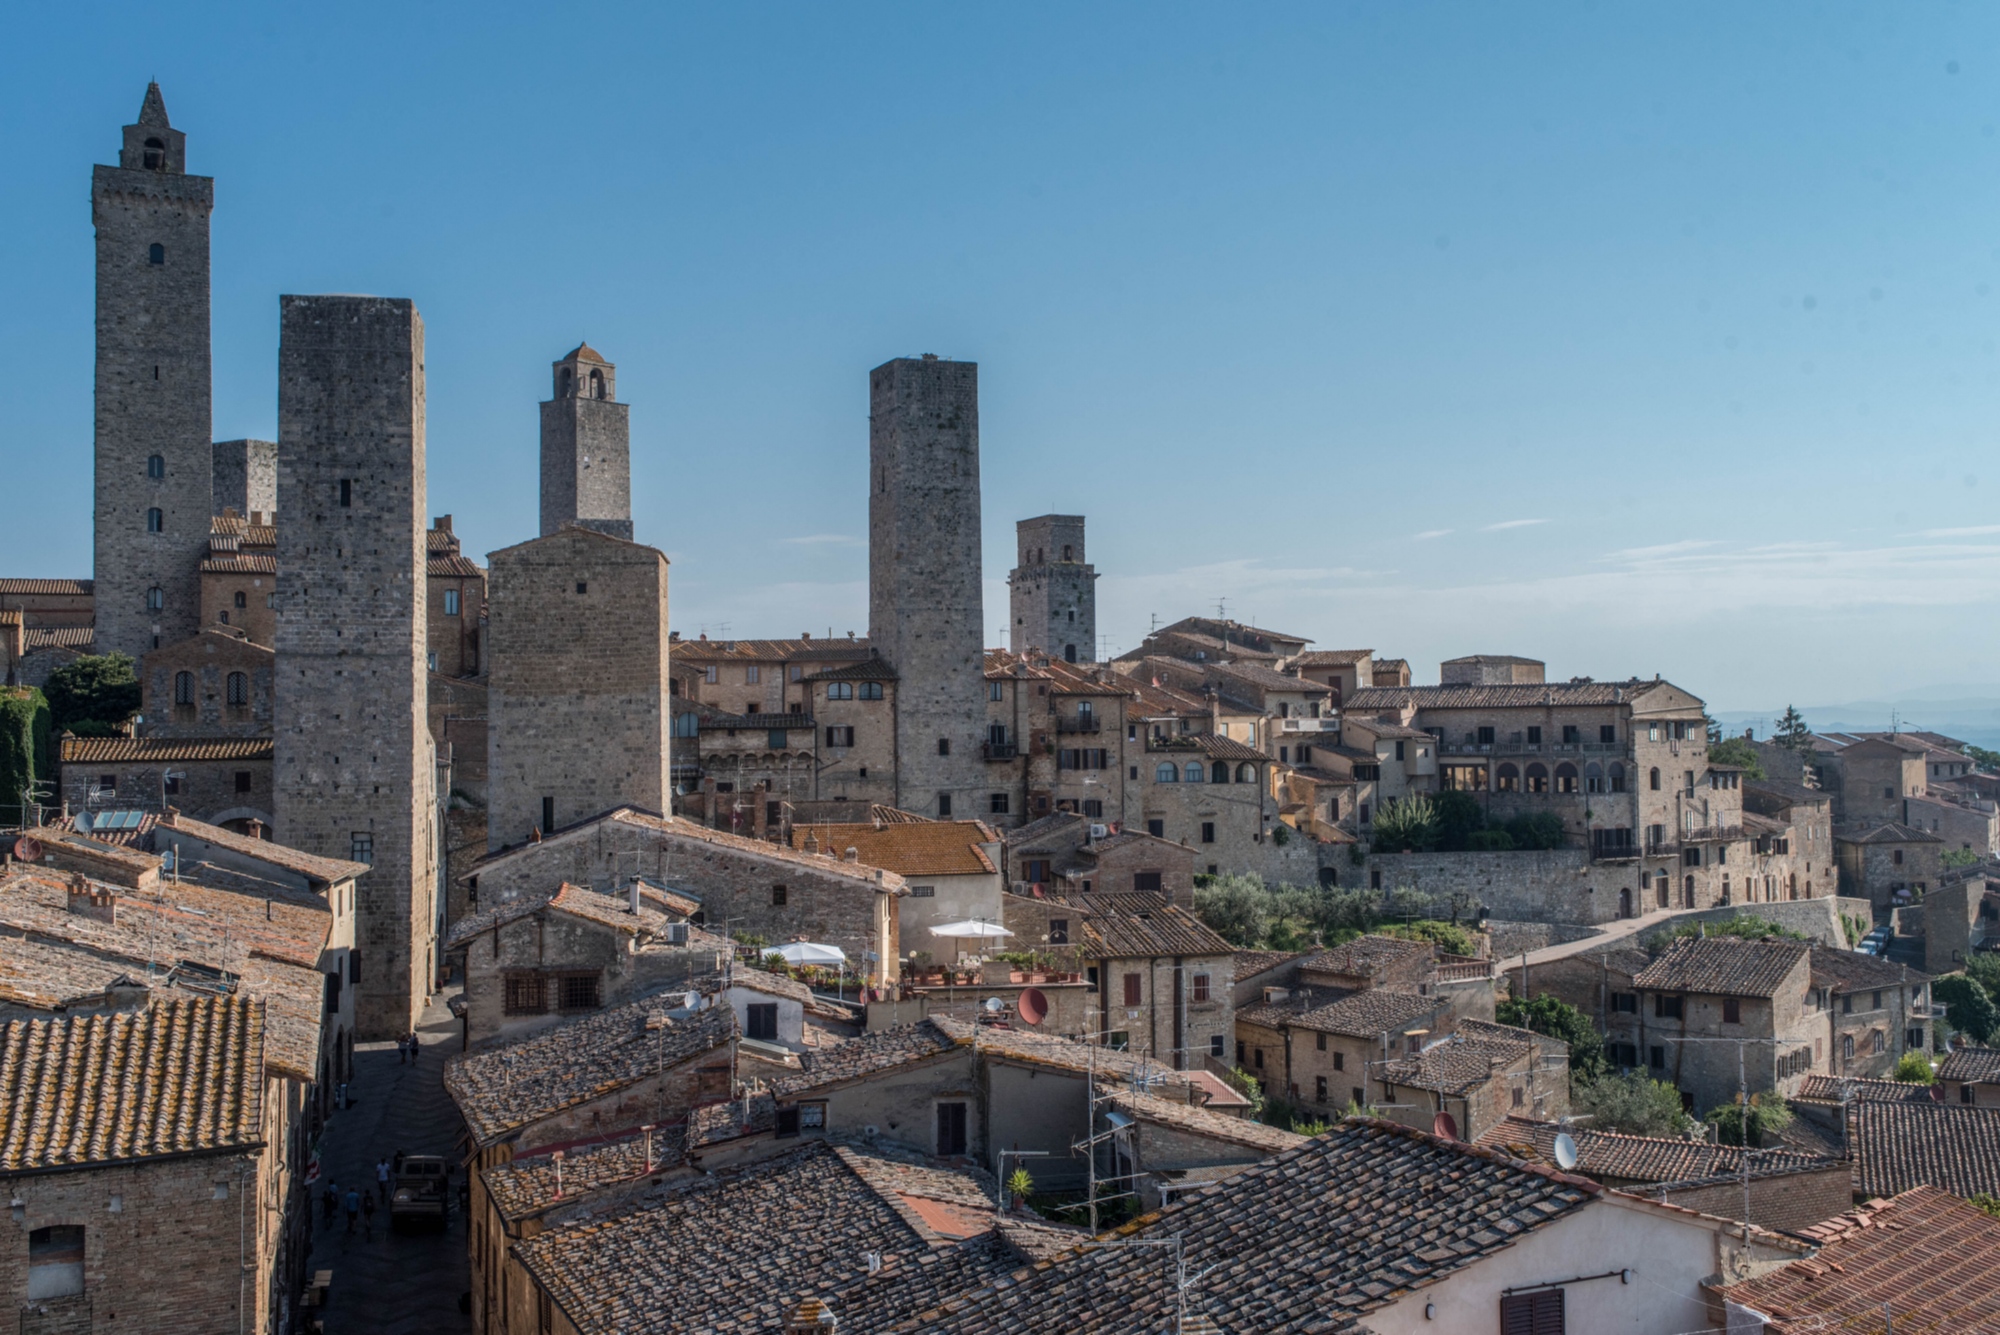 Torre Campatelli and the other towers of San Gimignano